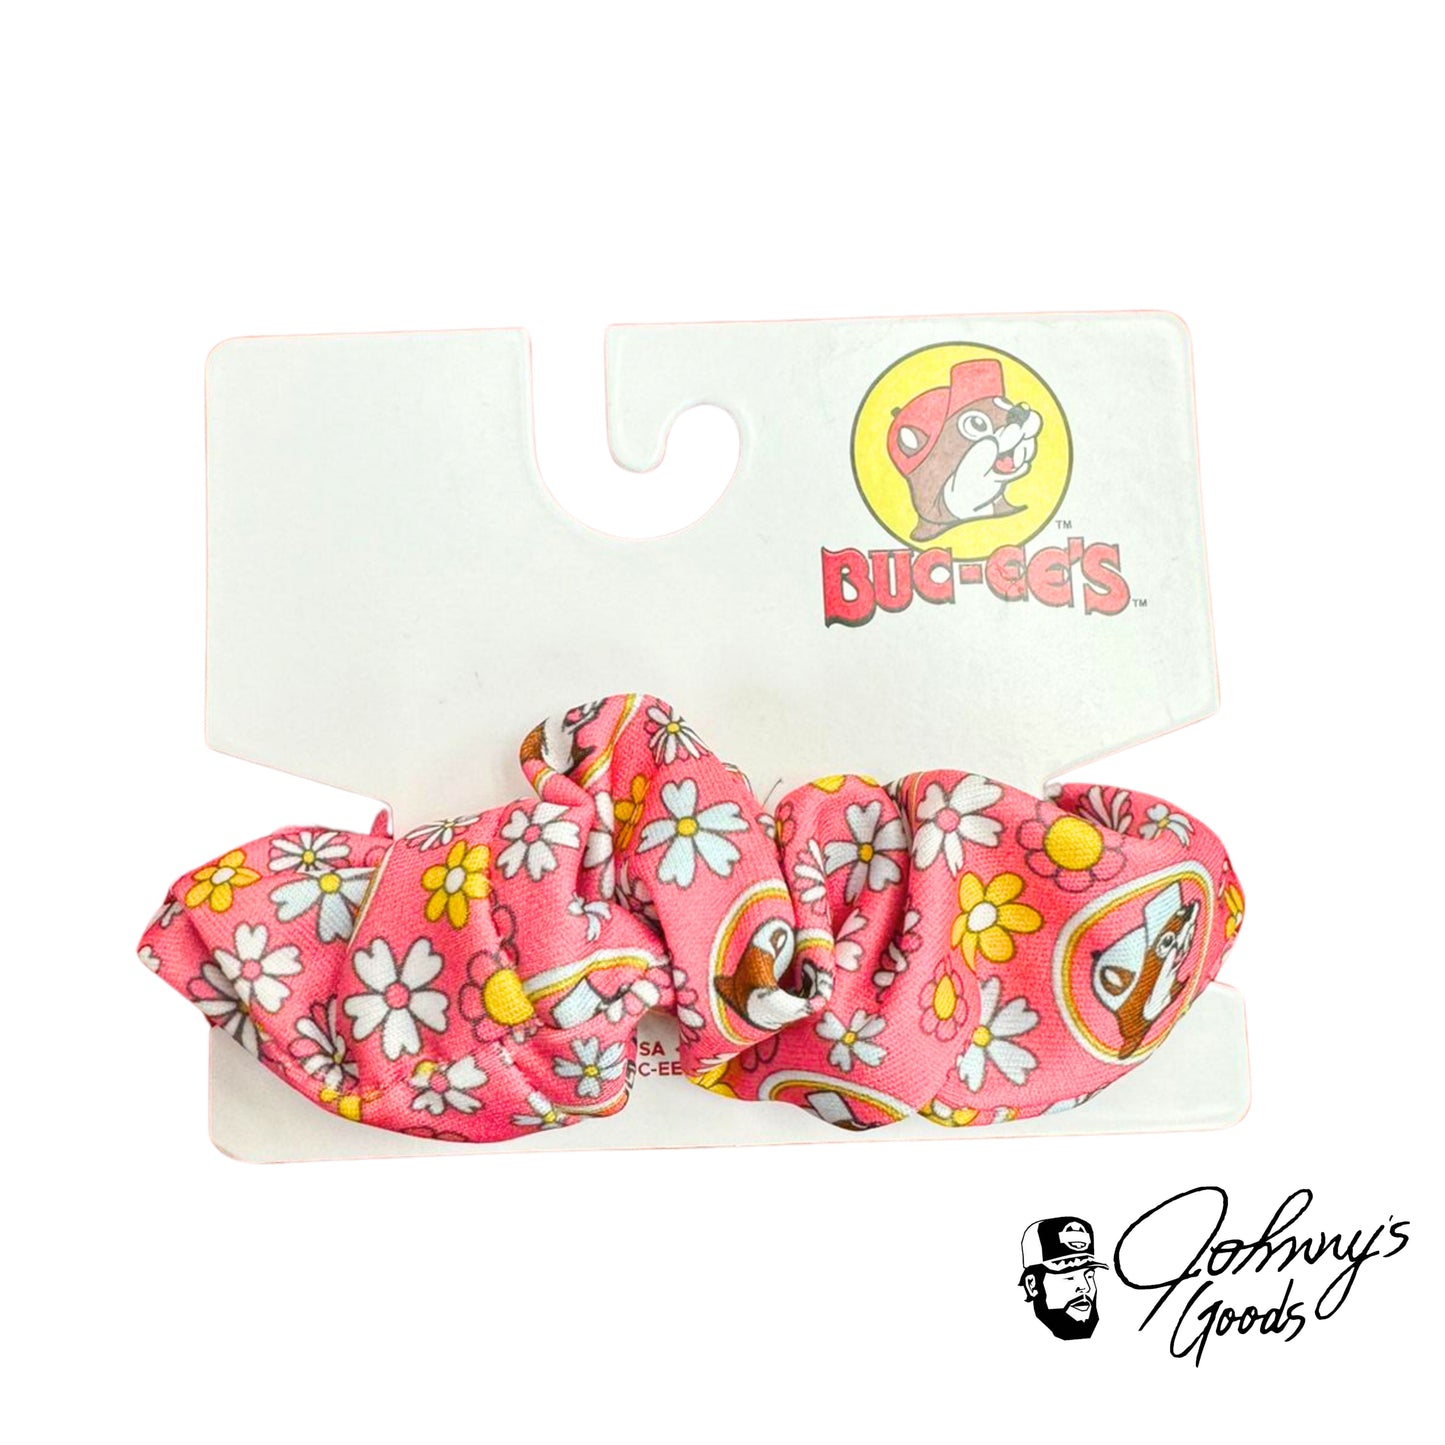 Buc-ee's Daisy Colored Hair Accessories buc ees buc ee's bucees buccees buc-ees